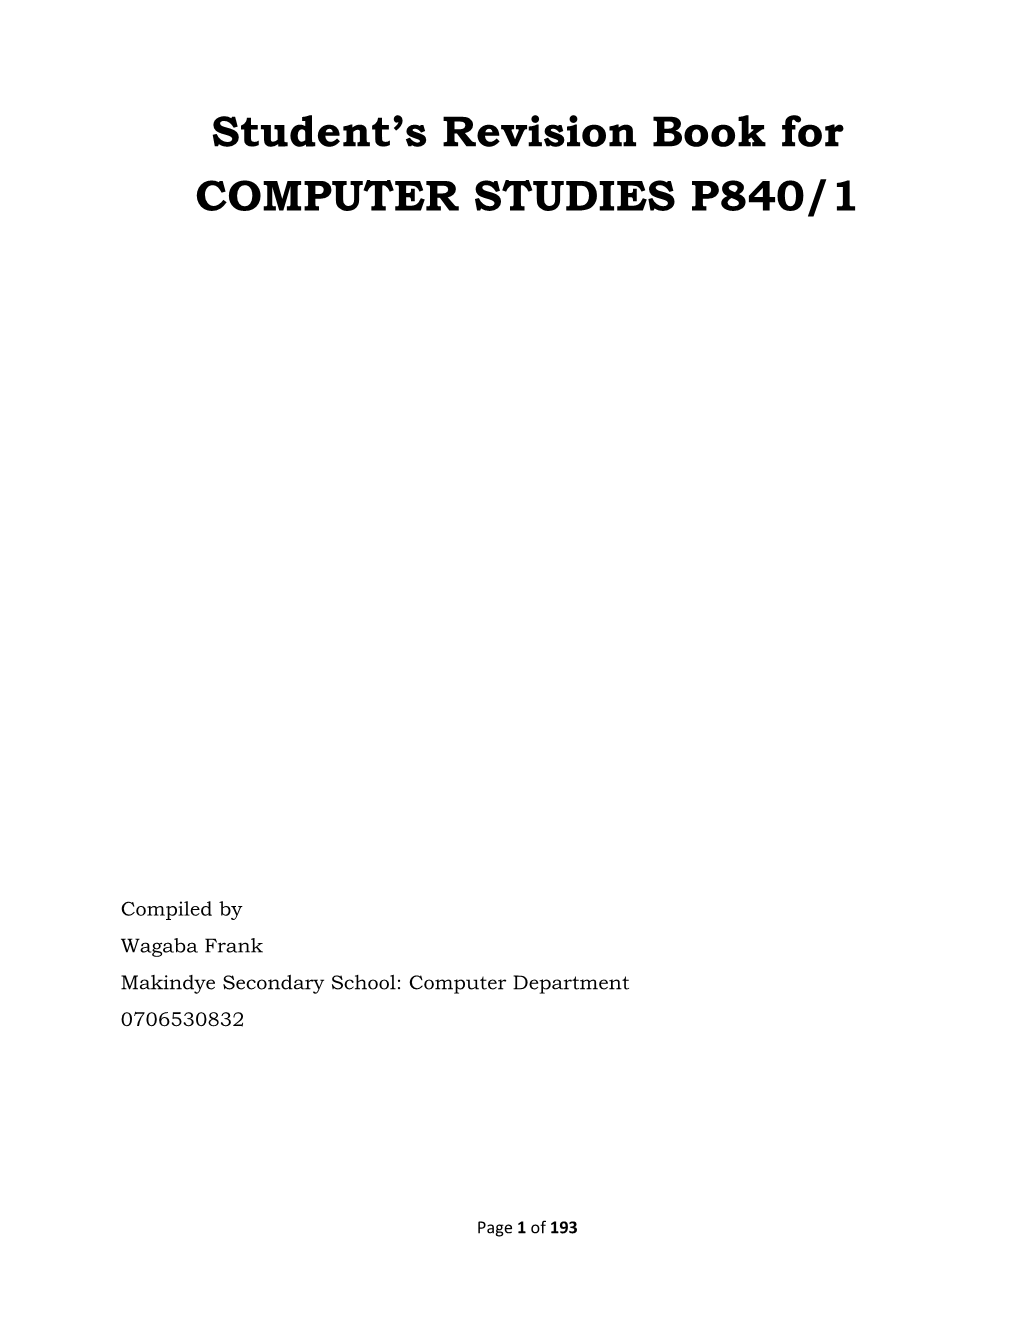 Student's Revision Book for COMPUTER STUDIES P840/1